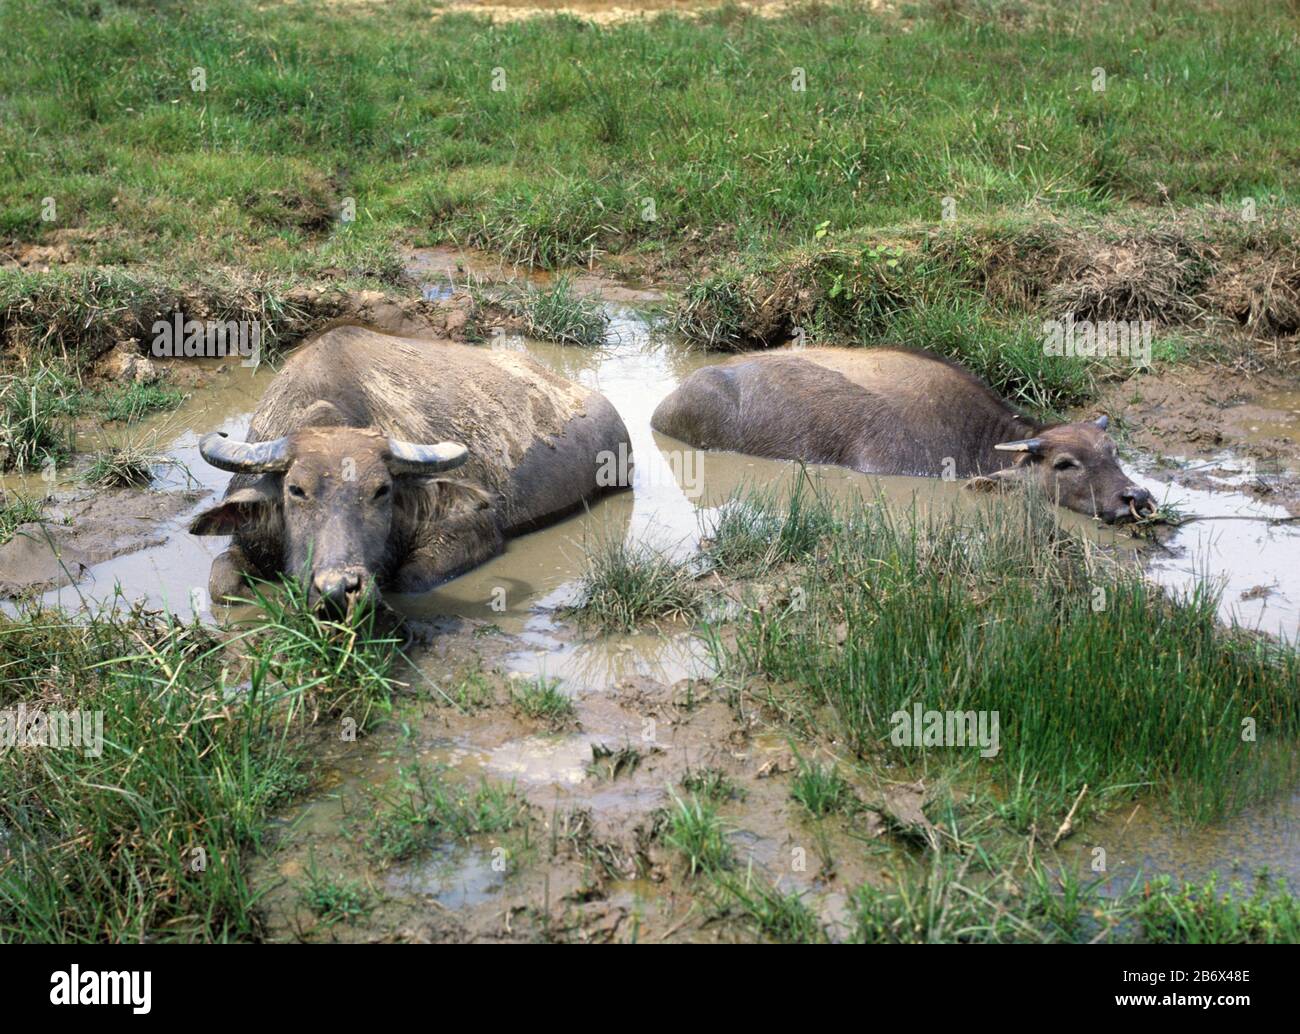 Two water buffalos used for working rice and sugar can crops resting in a muddy water hole at midday, Guimaras, Philippines, February Stock Photo